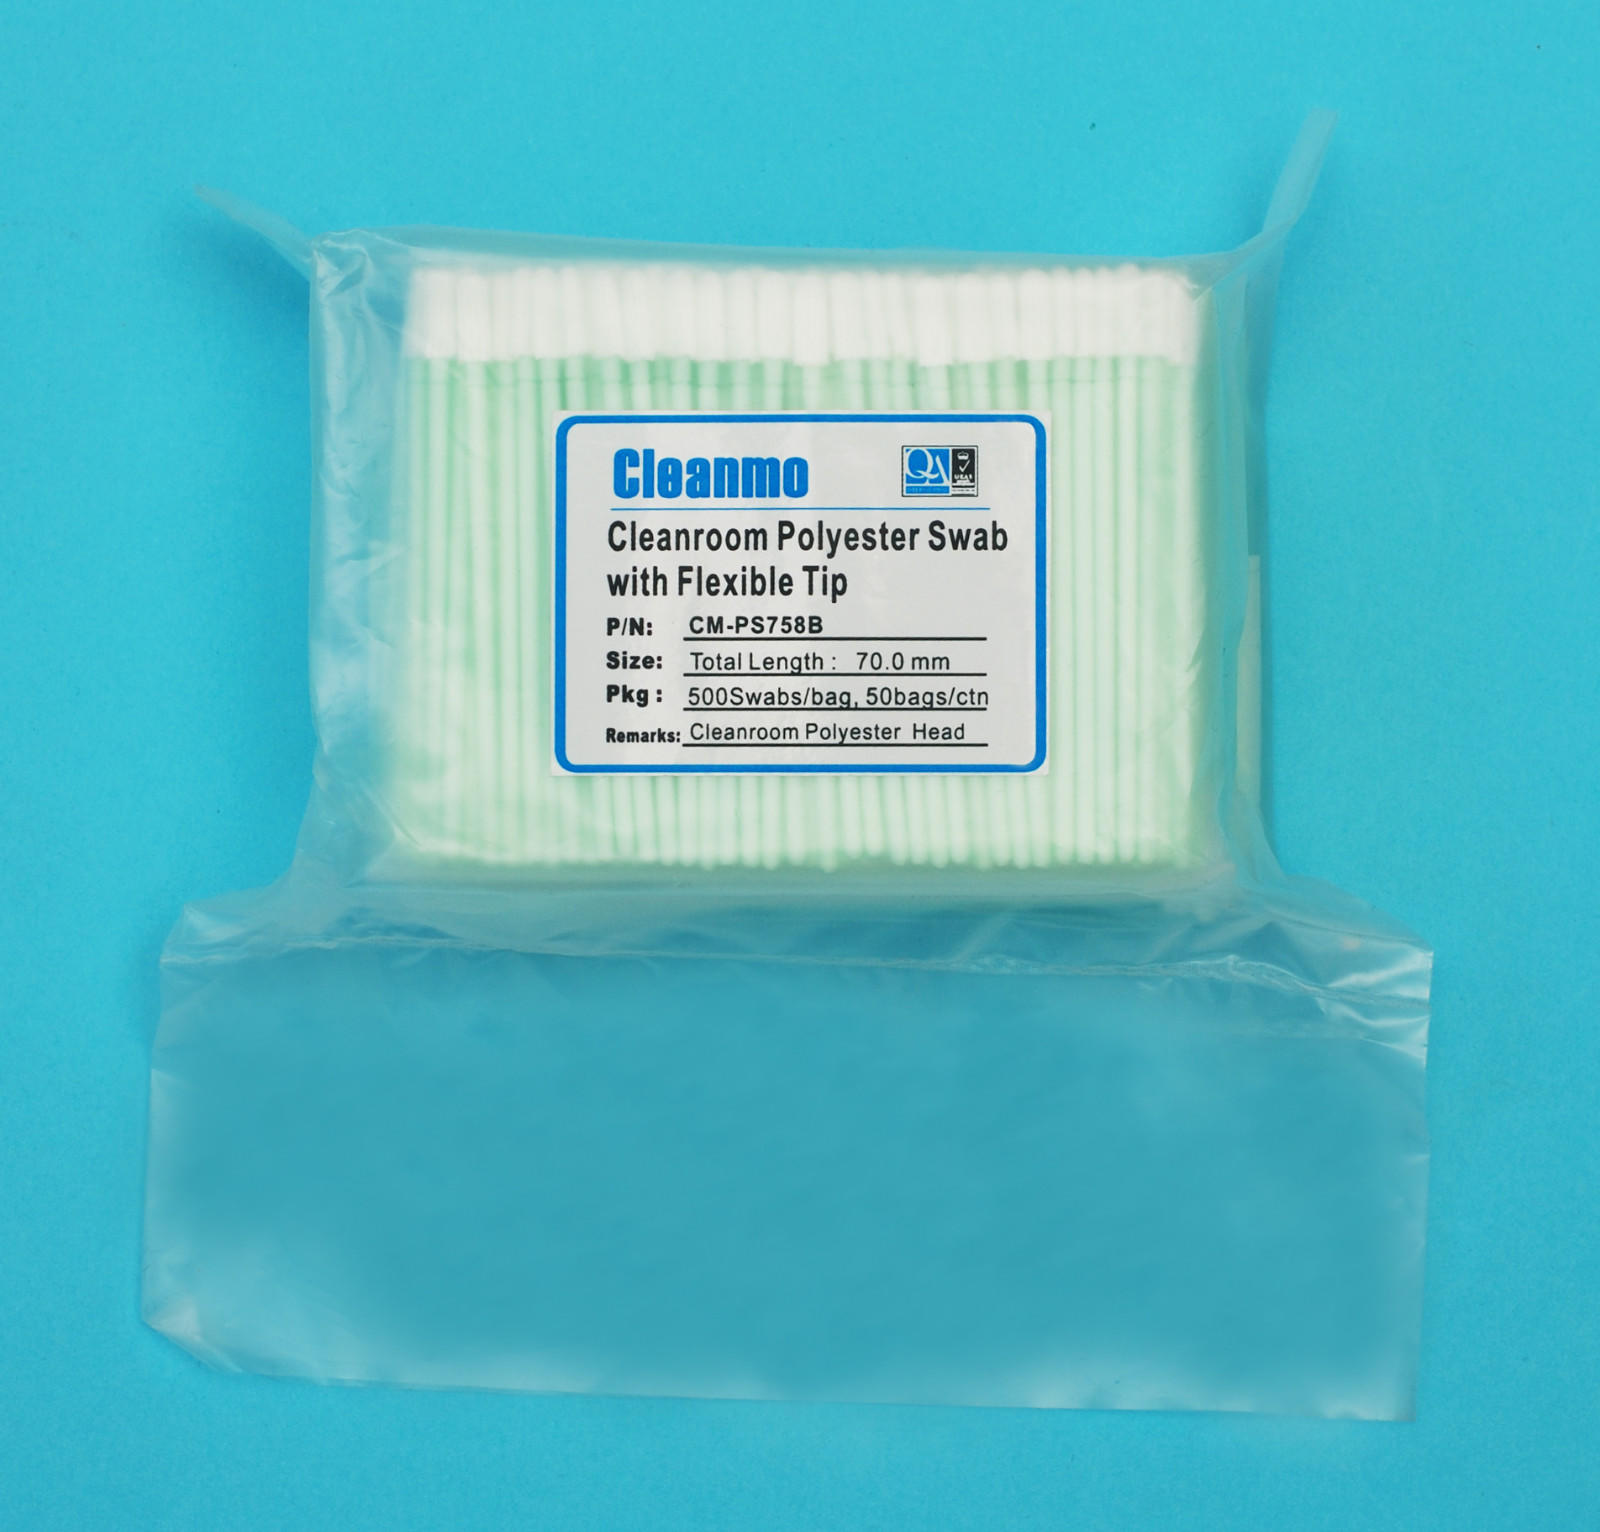 Cleanmo high quality polyester cleanroom swabs manufacturer for printers